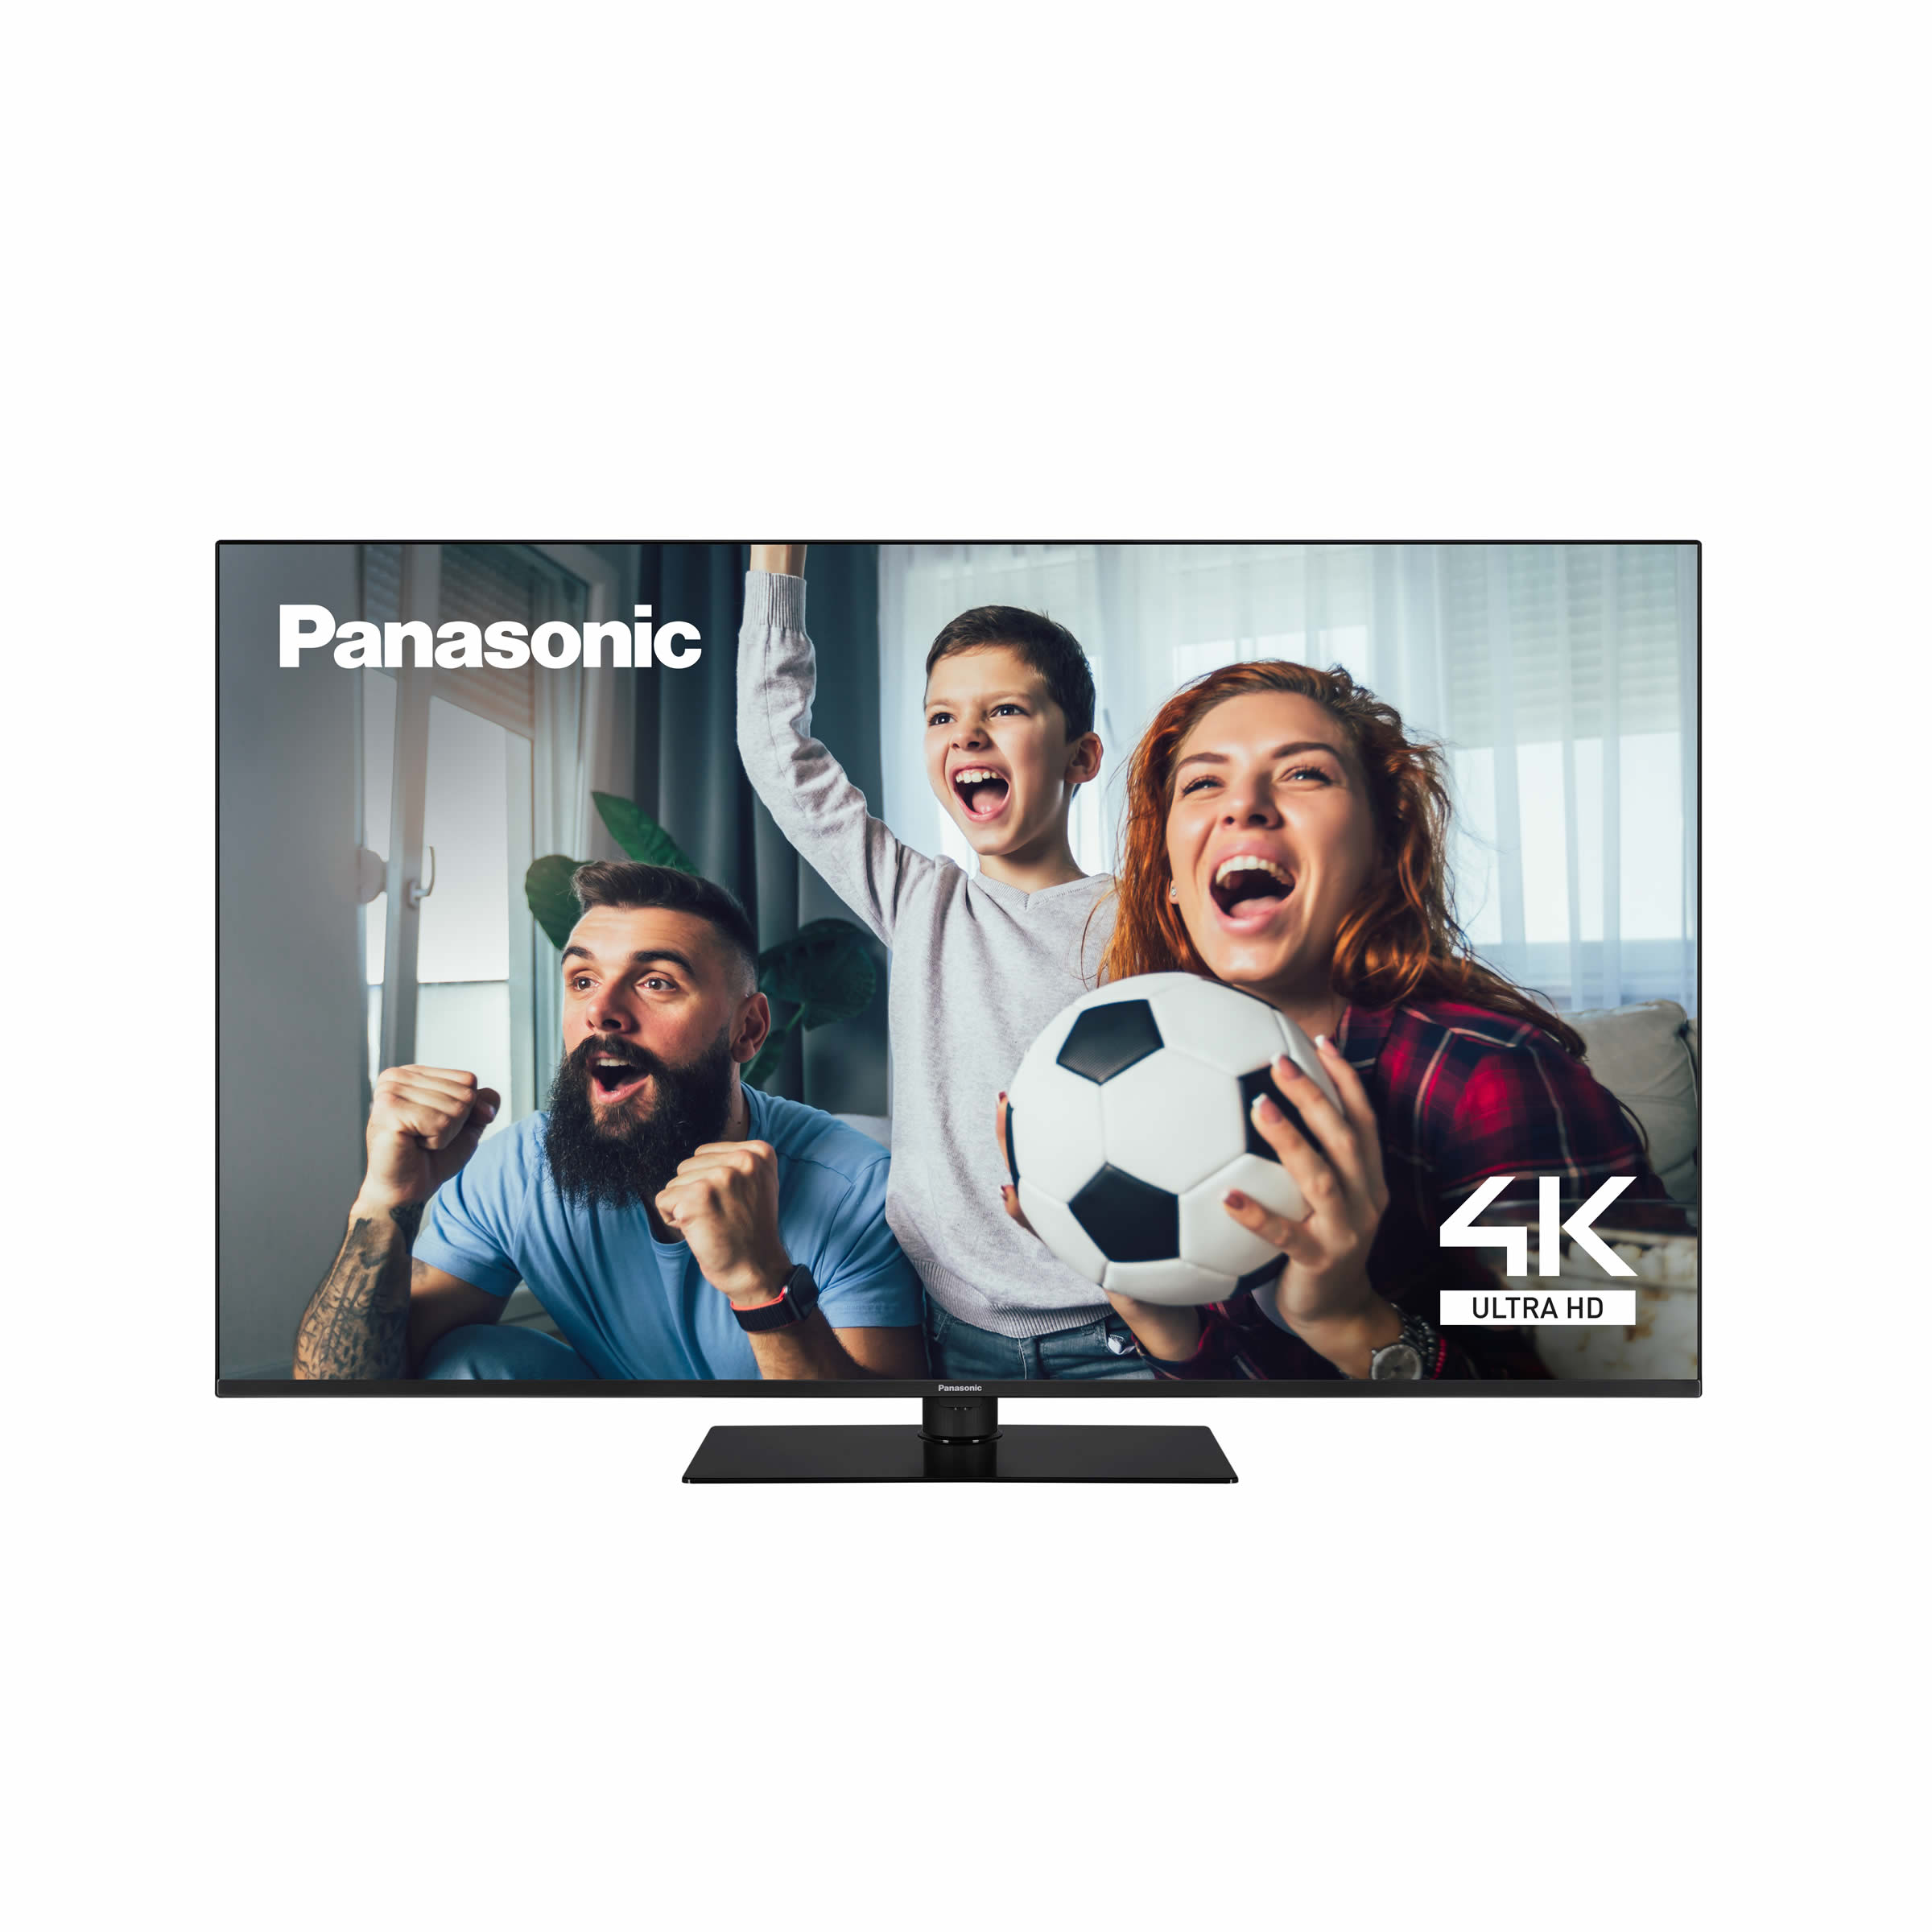 Panasonic 55inch Ultra HD 4K LED HDR10 SMART TV WiFi Android